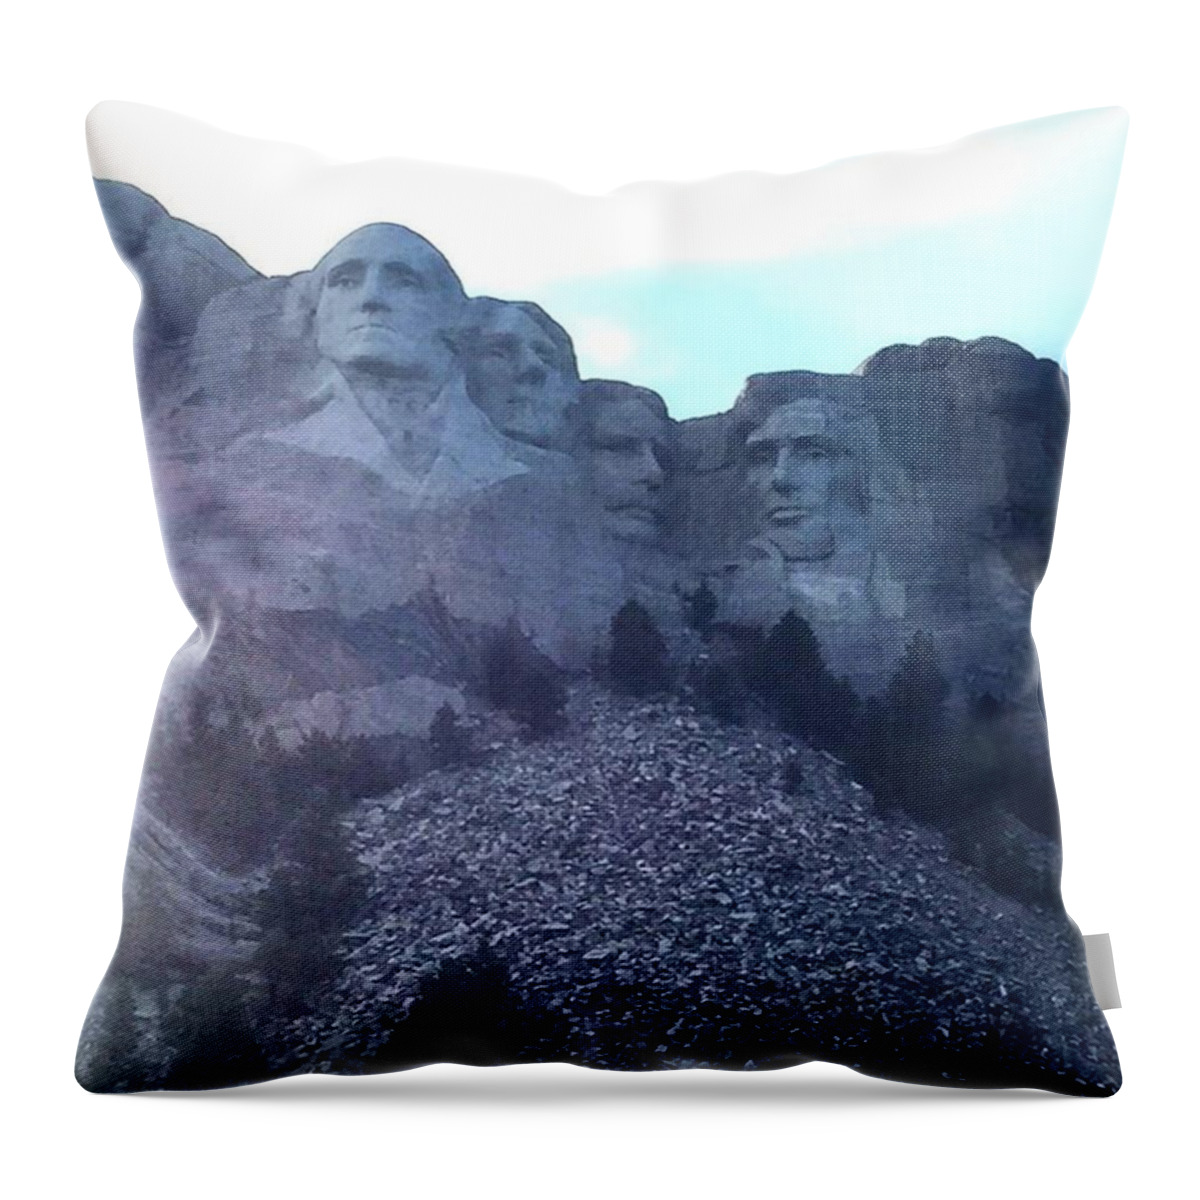 Mount Rushmore Throw Pillow featuring the photograph Mt Rushmore by Em Berens